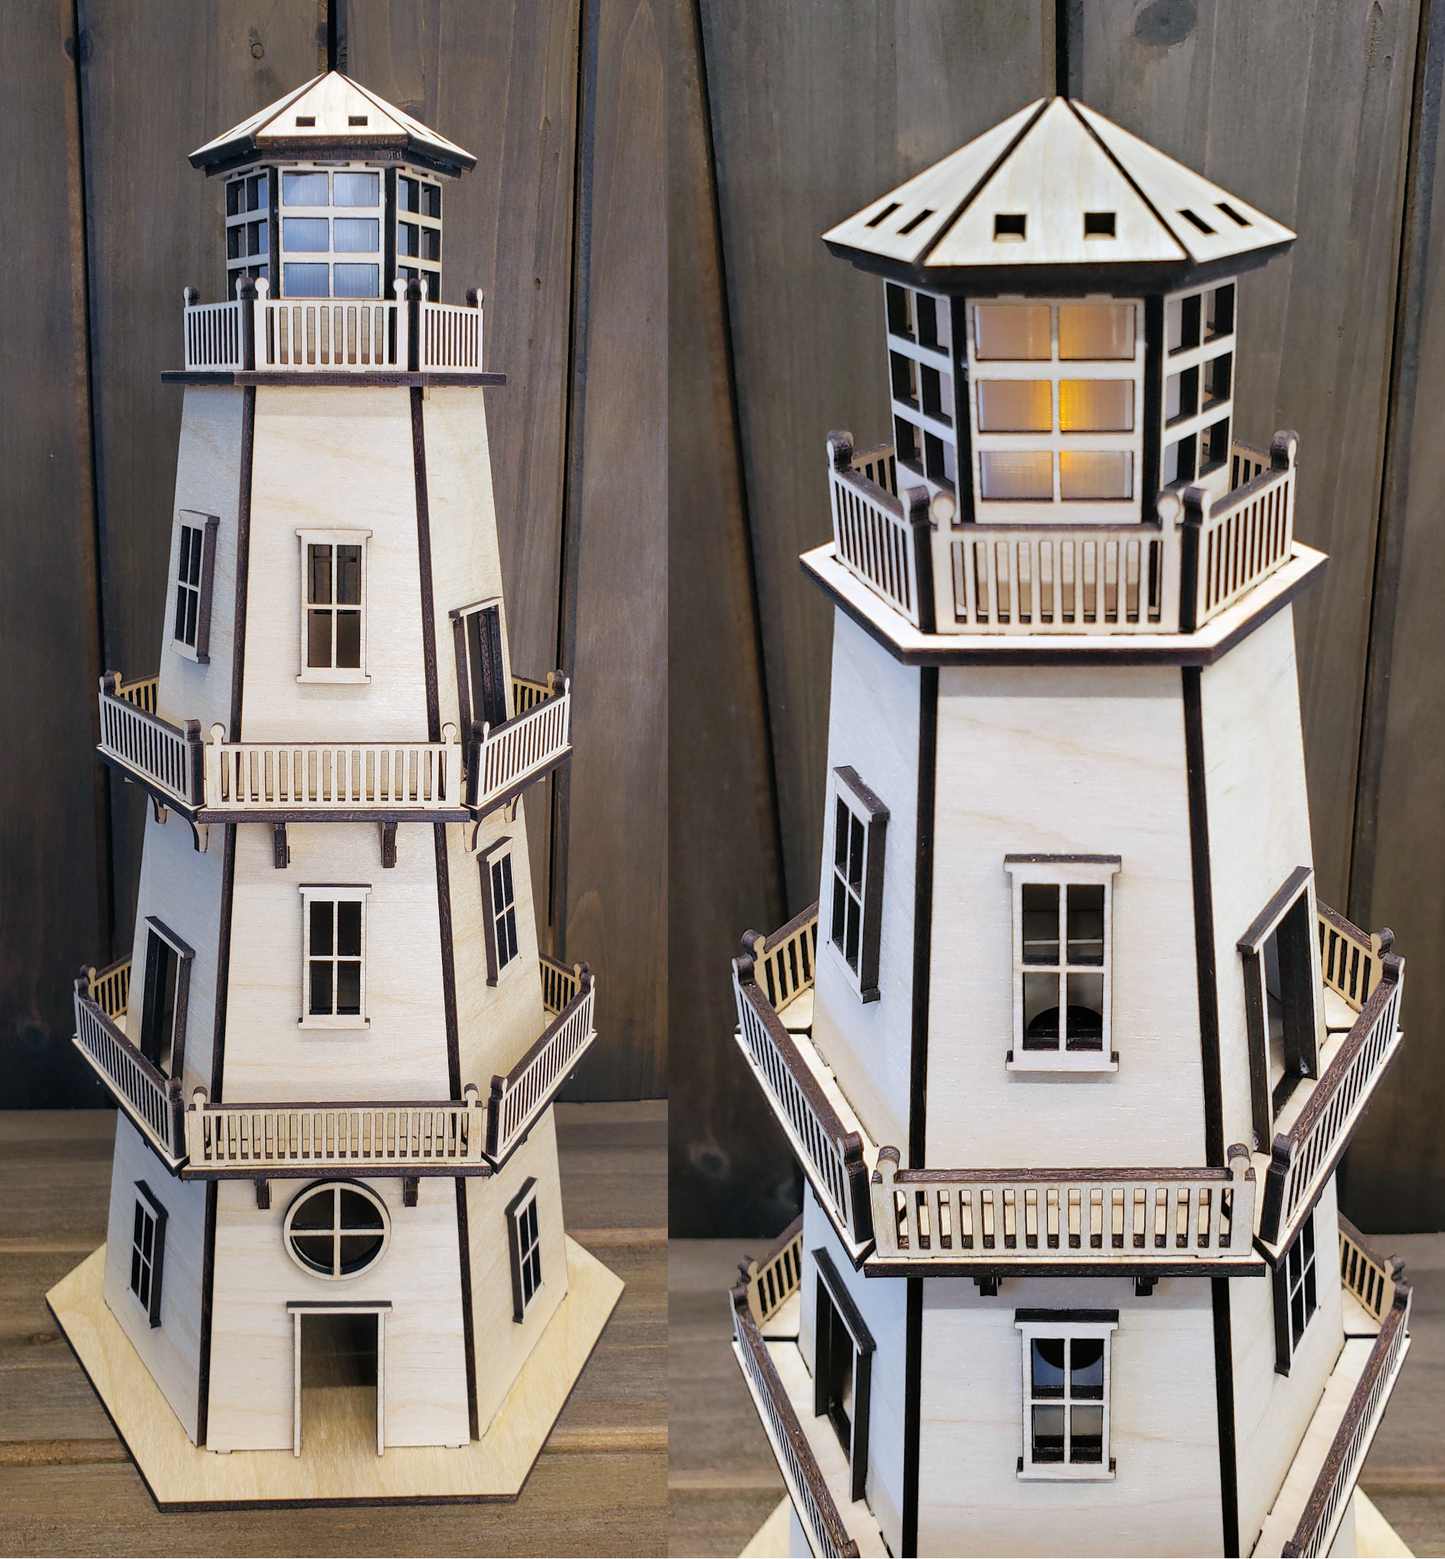 Dollhouse Lighthouse (11") w/LED Beacon Light - 2 Removable Wall Panels